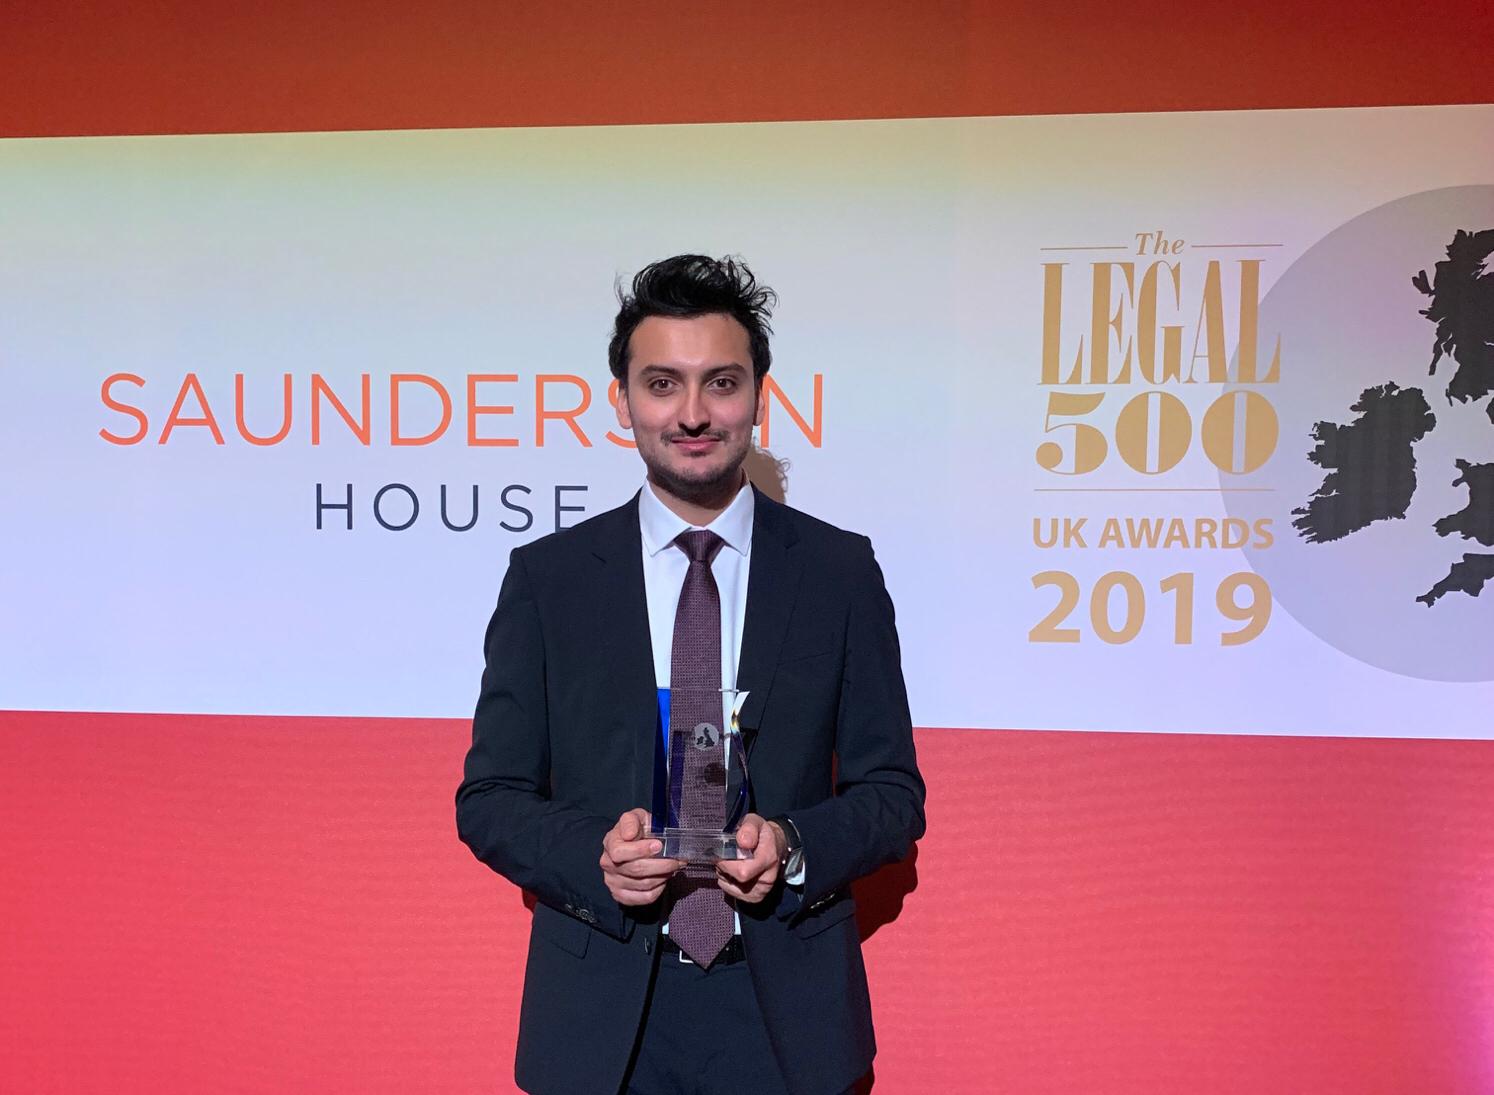 Advocate Usman Tariq named Scotland's Junior of the Year at Legal 500 Awards